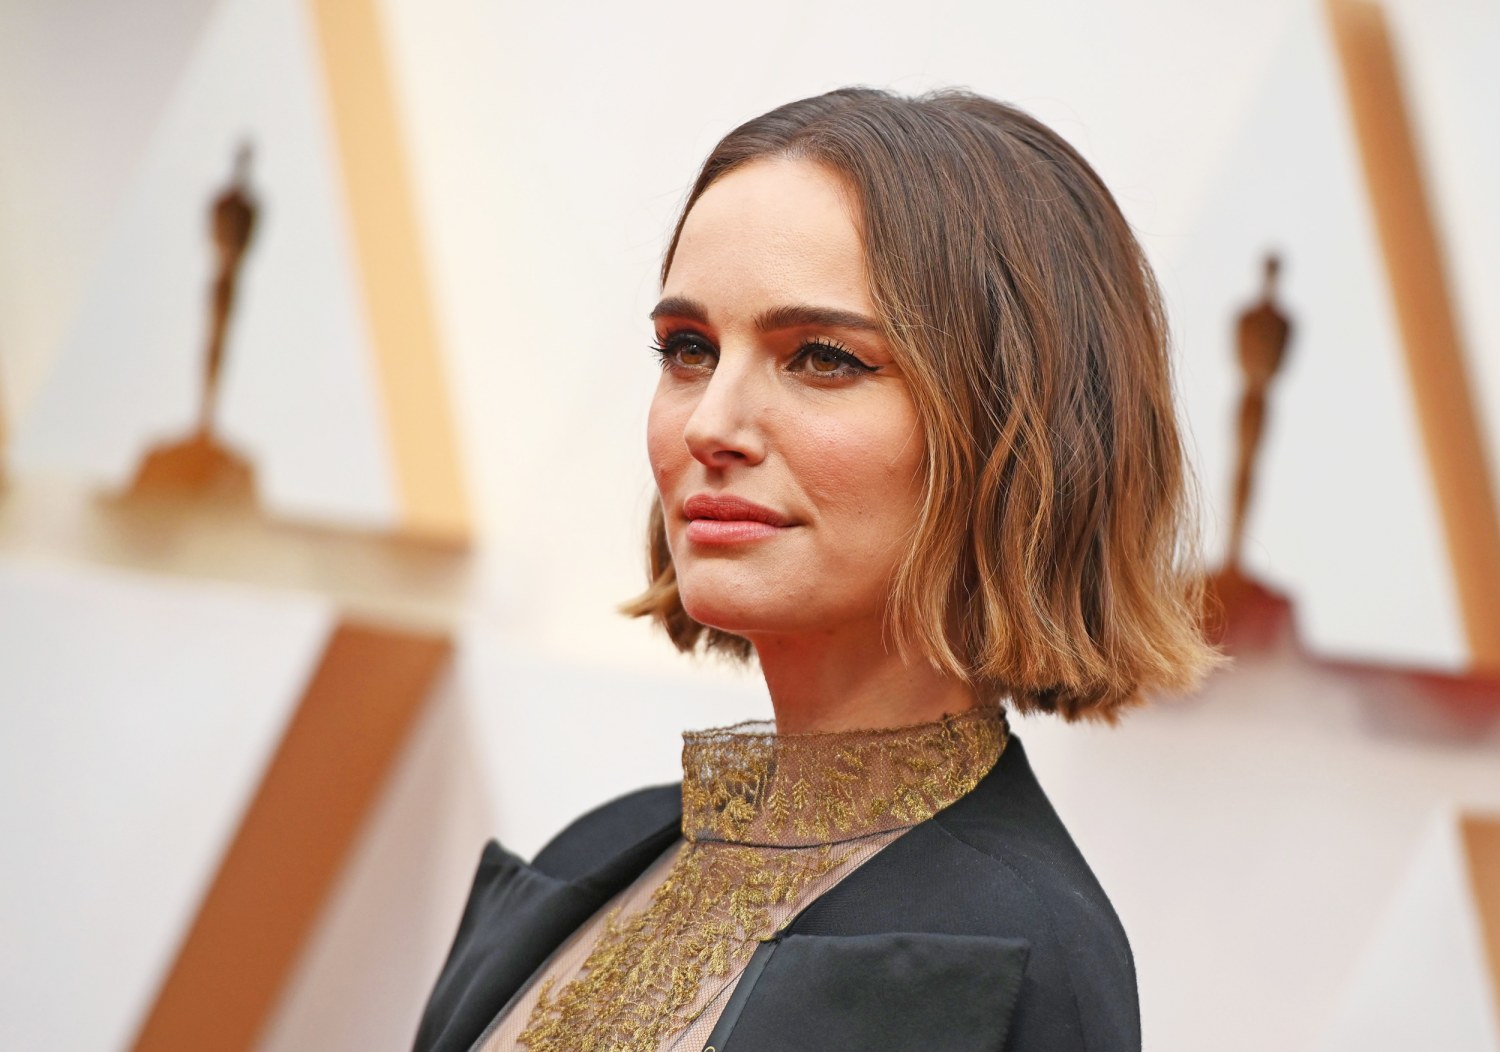 Boobs Pressed Forced - Natalie Portman says that sexualized roles as a teen harmed her. When will  Hollywood listen?